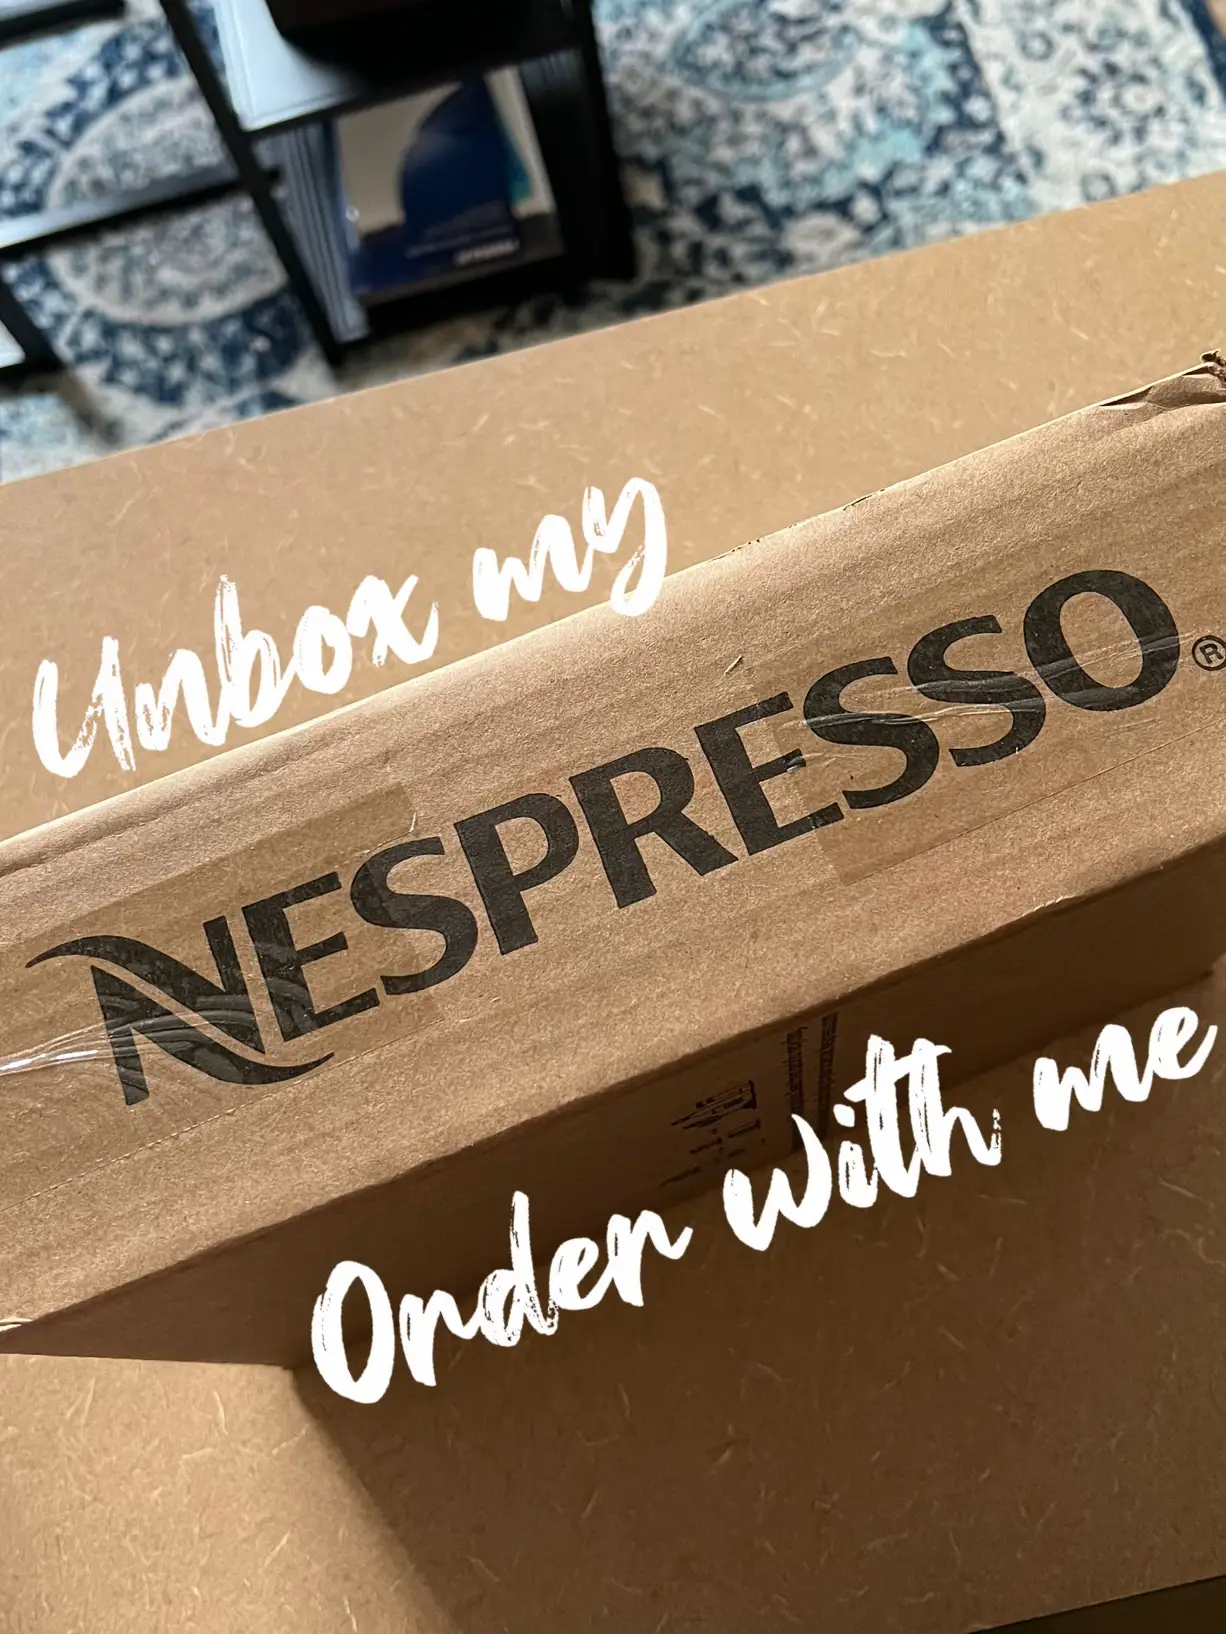 Nespresso View Recipe Glasses REVIEW & UNBOXING